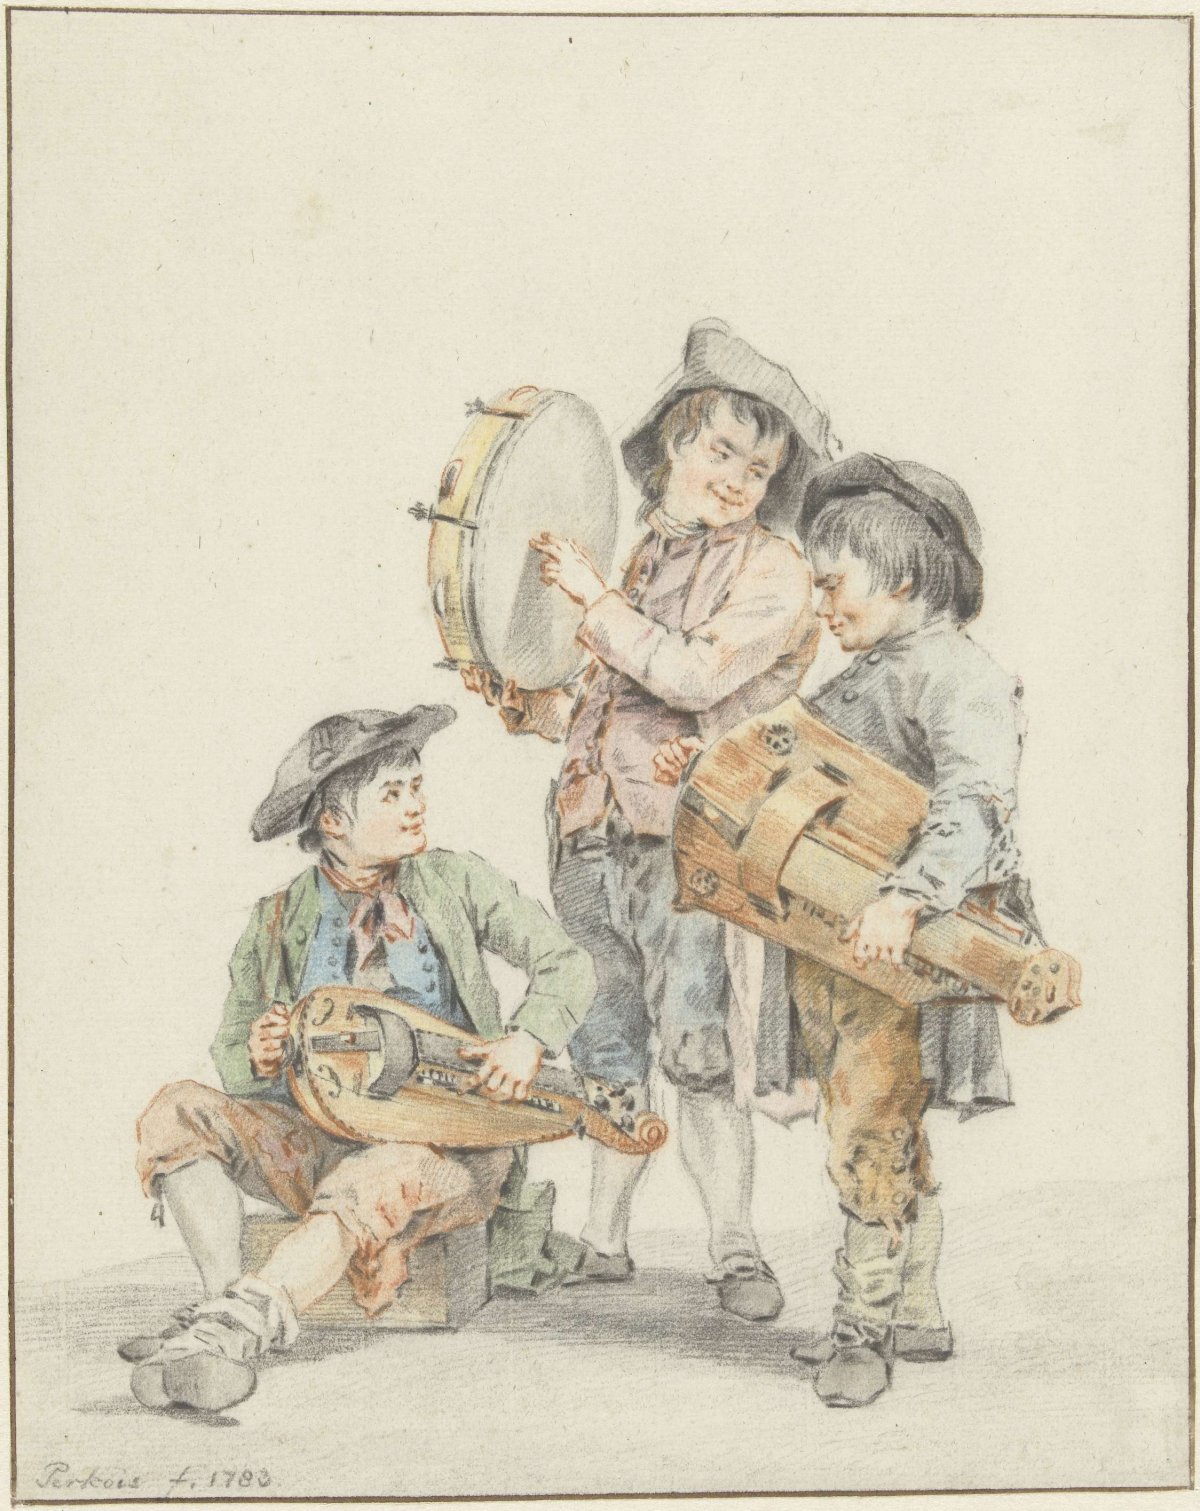 Three boys with musical instruments, Jacob Perkois, 1783